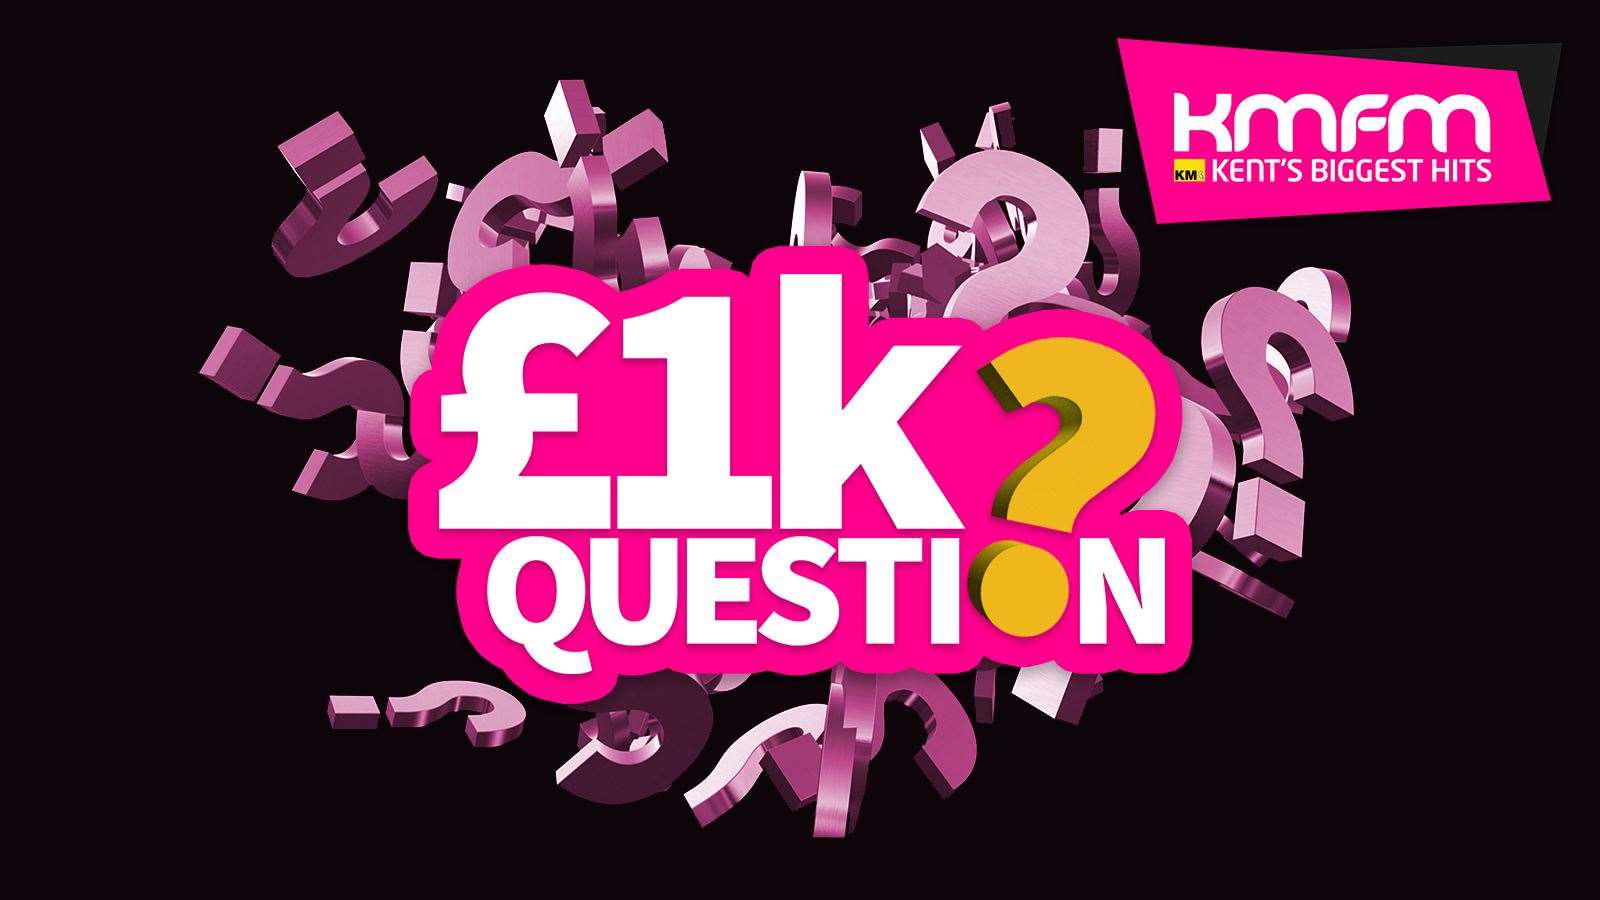 Listen to kmfm today for your chance to win £1,000